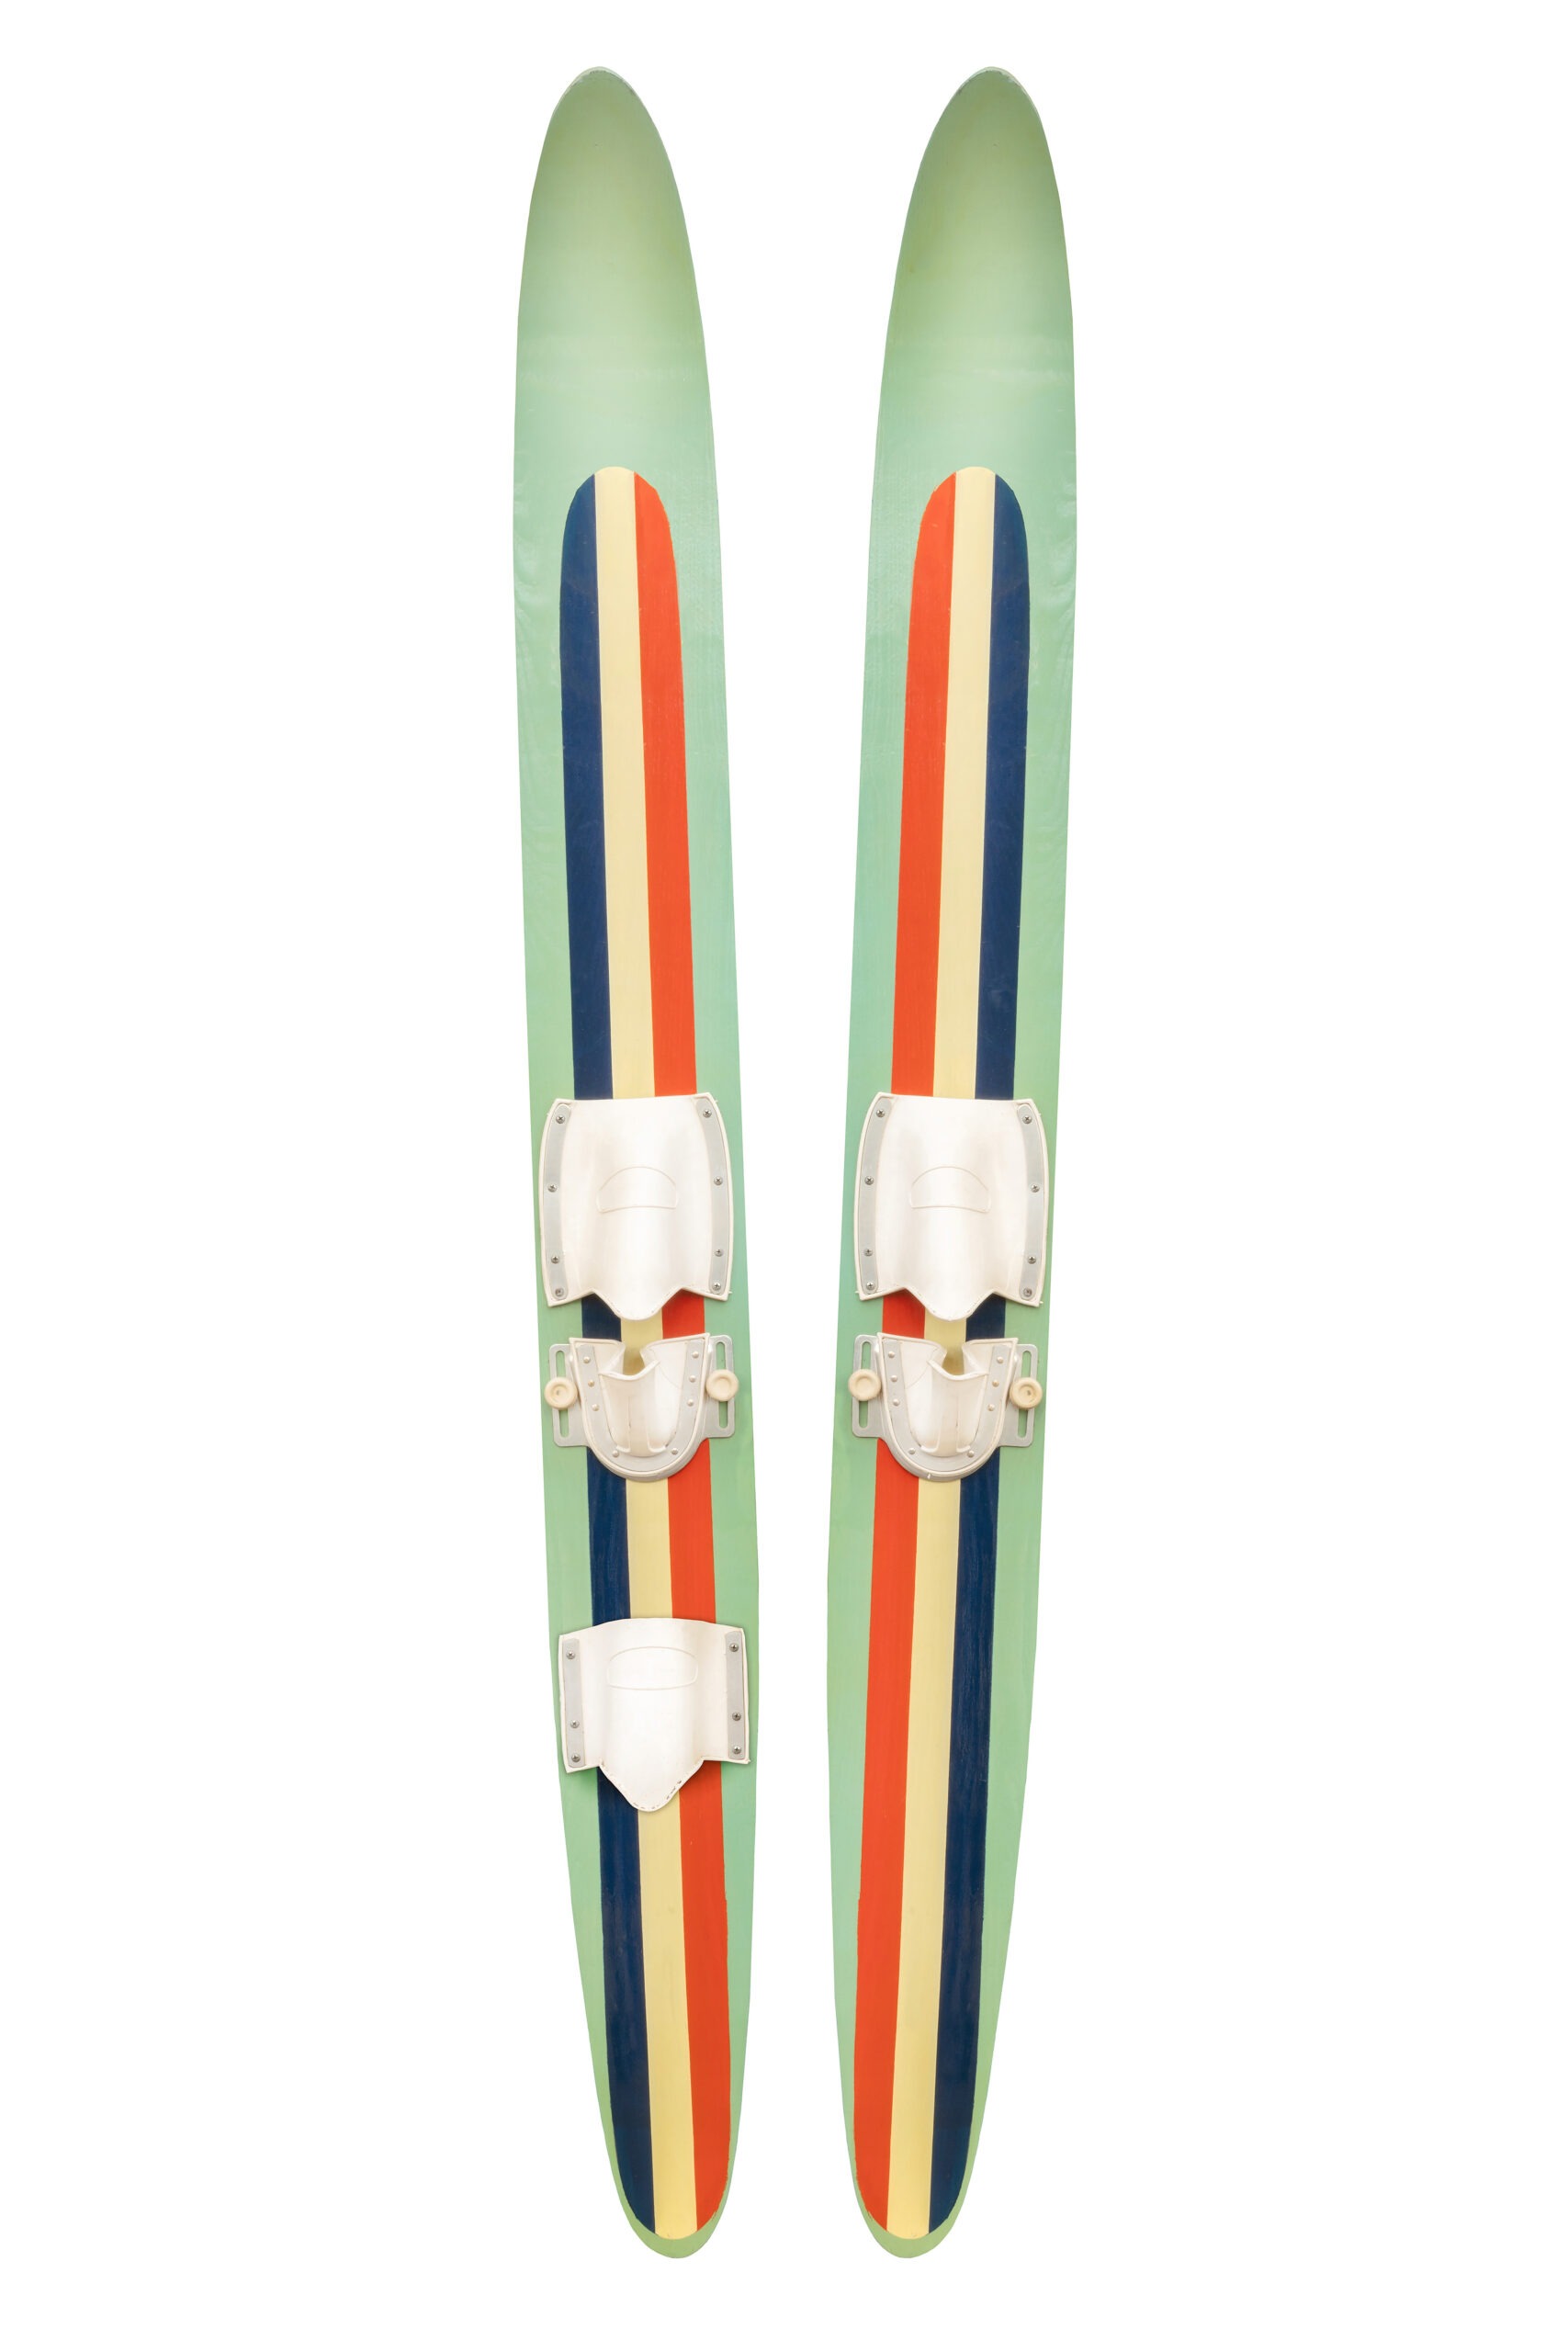 a-couple-of-water-skis